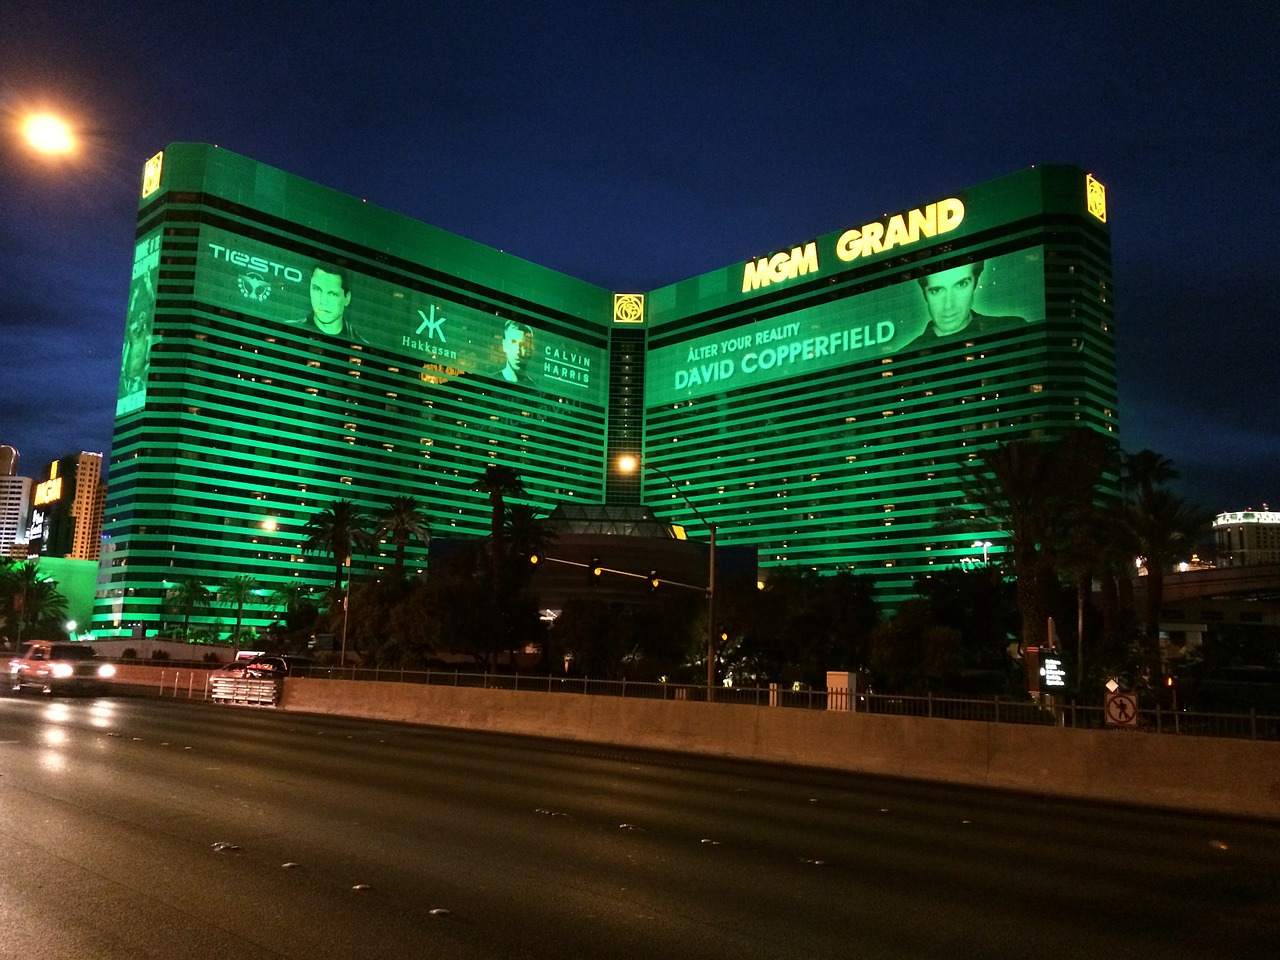 The MGM Grand in Las Vegas